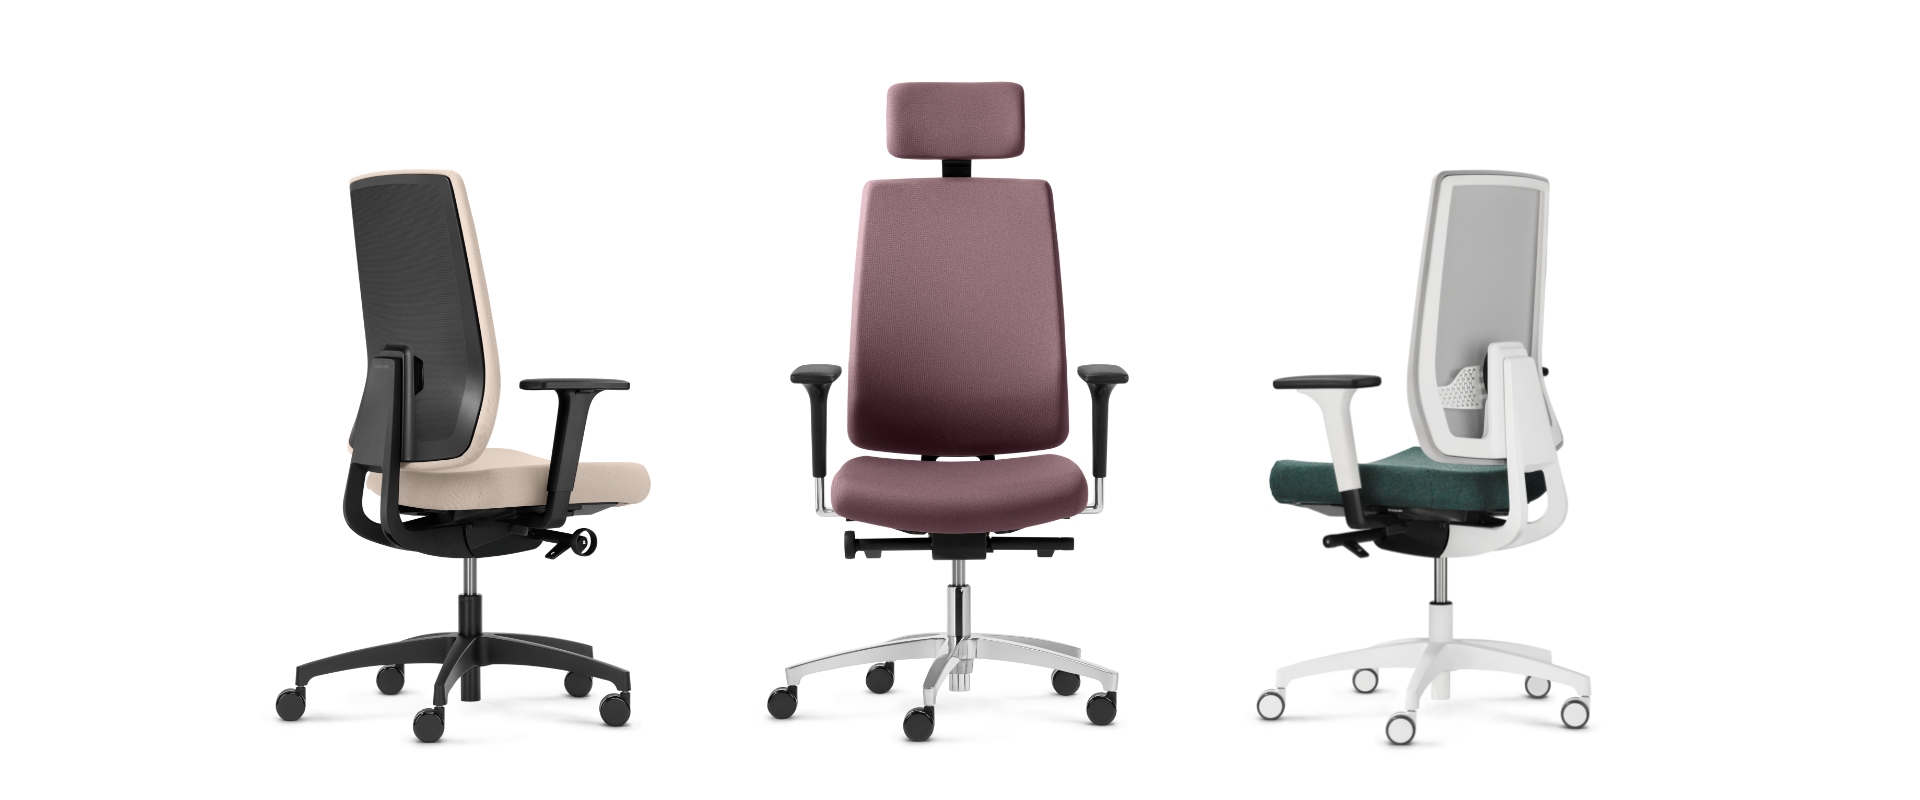 Office chair Indeed: Configure a sustainable swivel chair